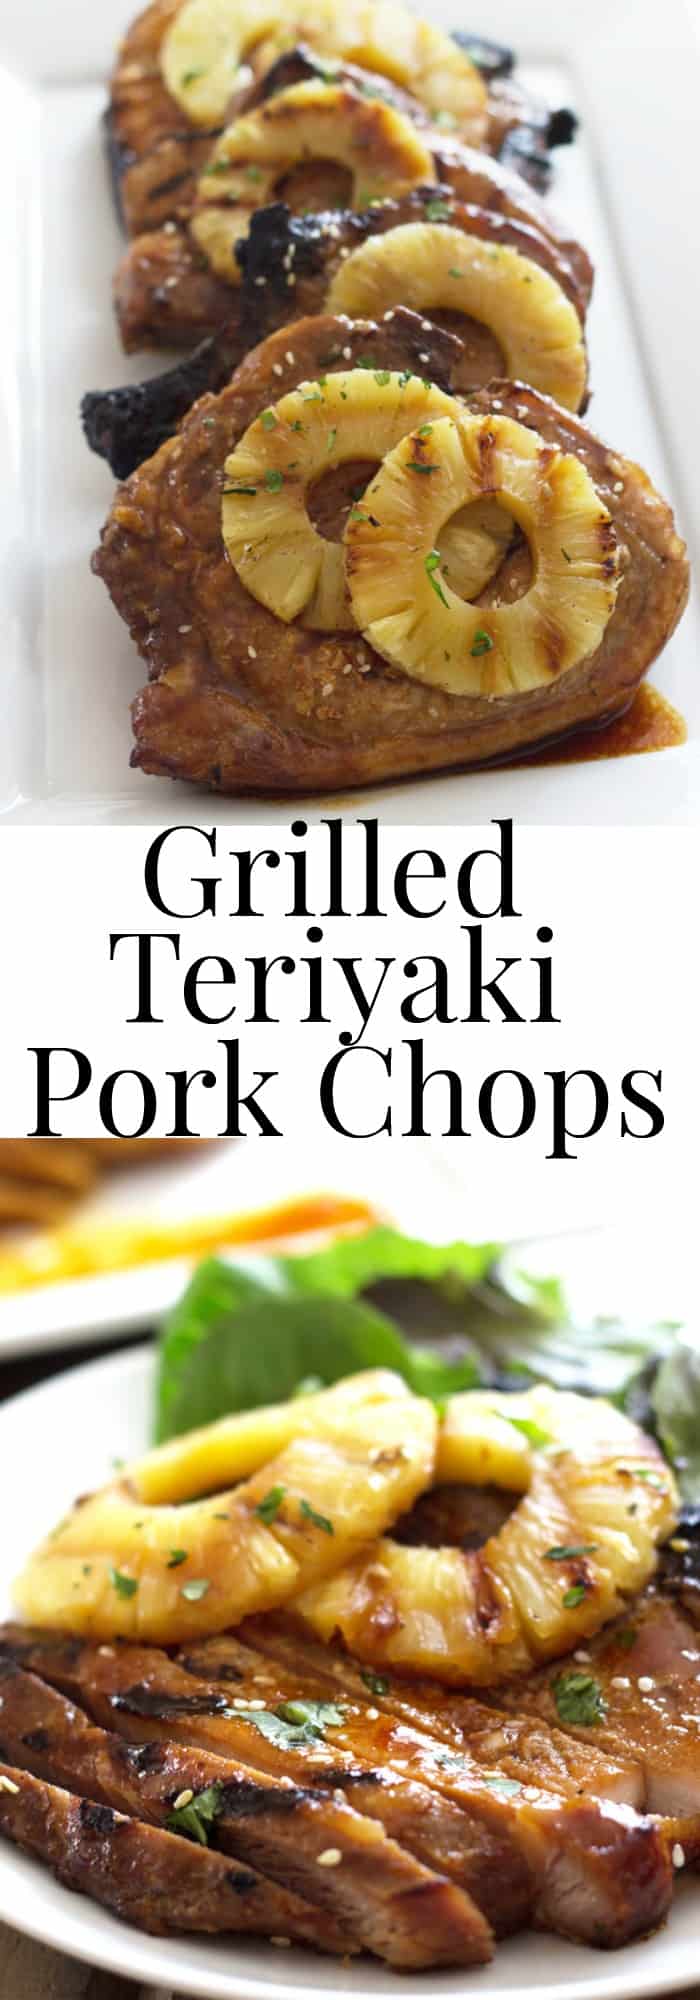 Pork chops marinated in a simple homemade teriyaki sauce then grilled alongside pineapple slices